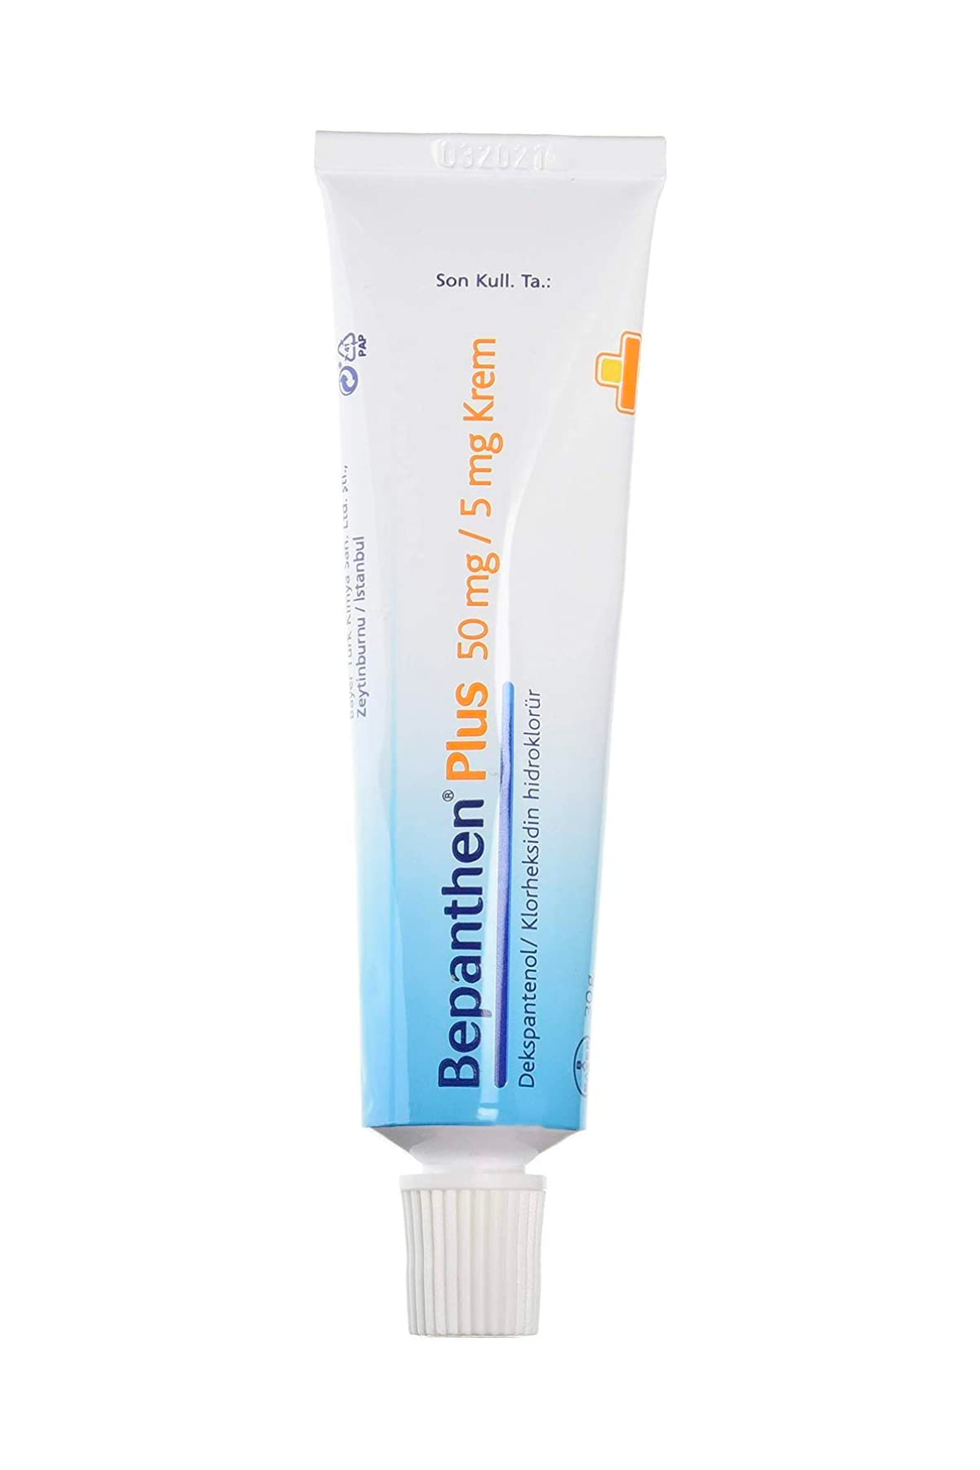 First Aid Antiseptic Wound Healing Cream